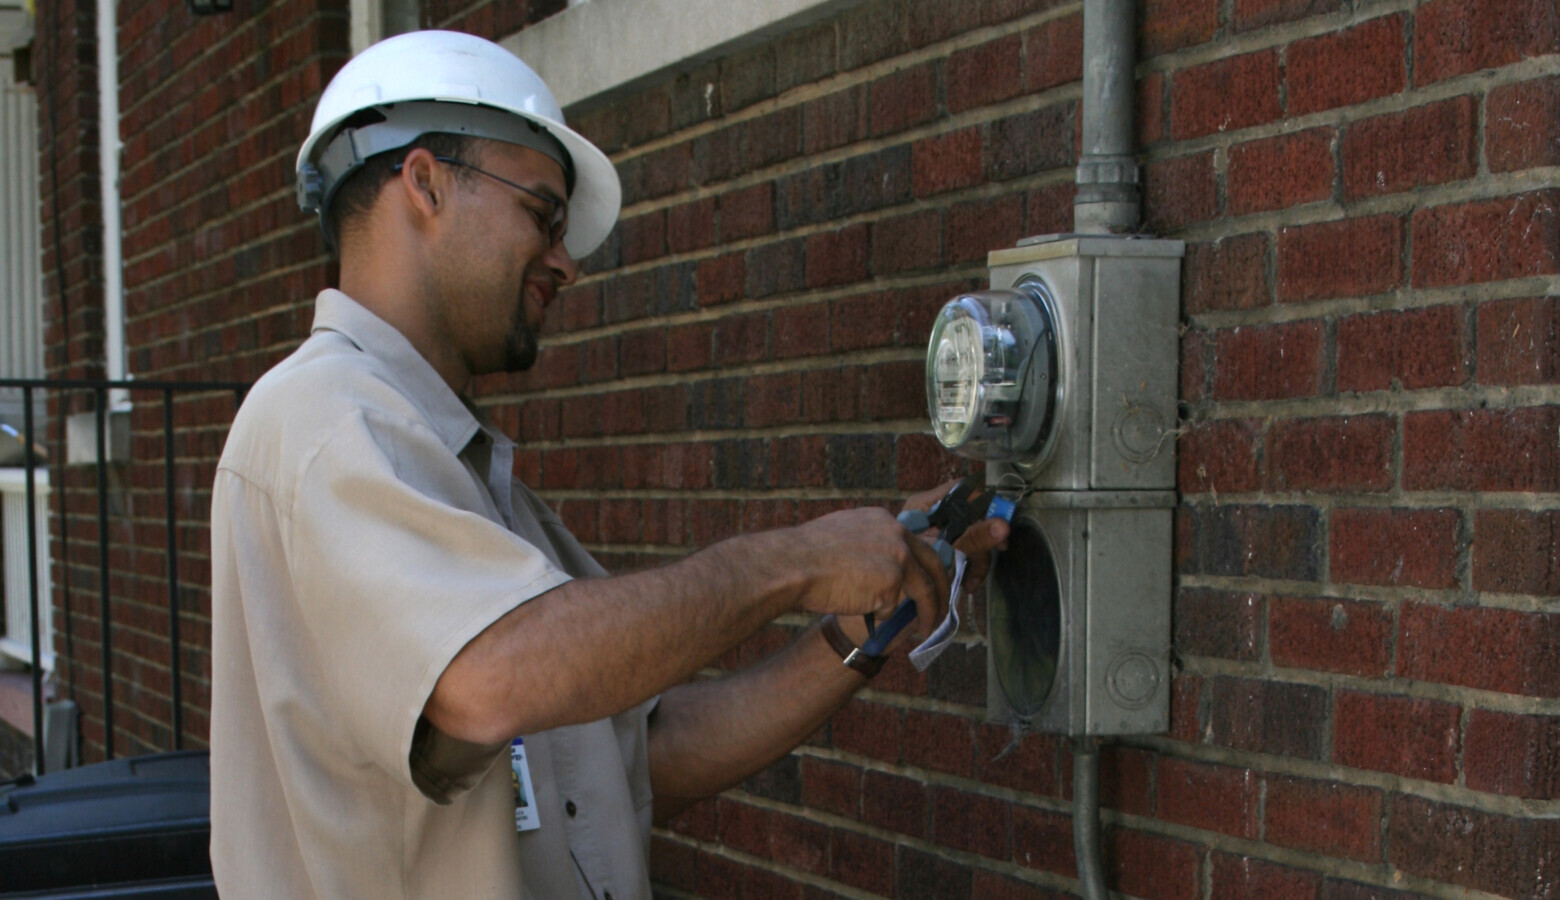 A Duke Energy technician disconnecting electricity at a residence due to nonpayment in North Carolina, 2008. (Ildar Sagdejev/Wikimedia Commons)